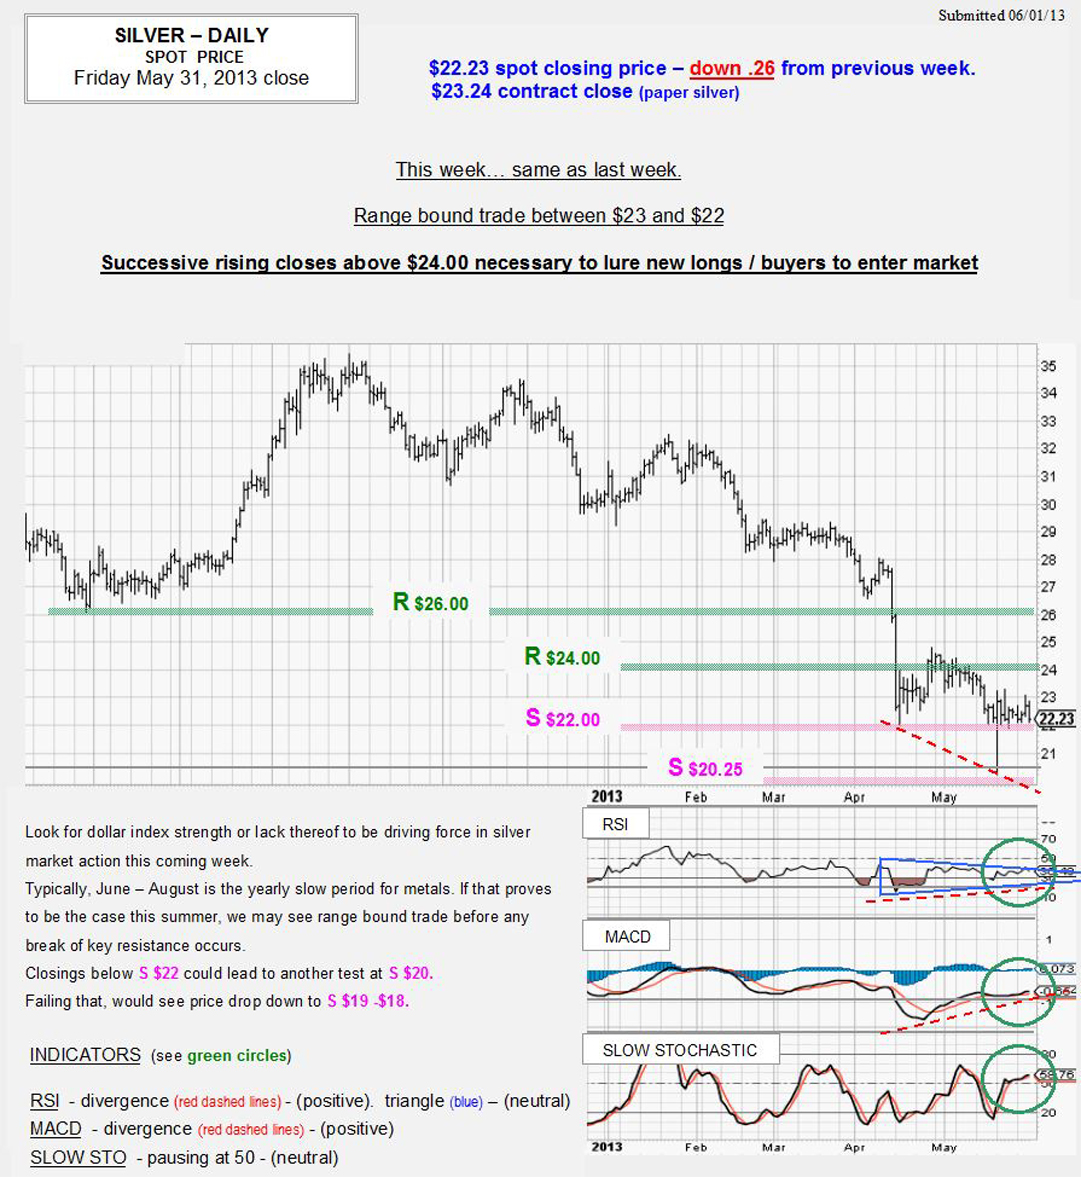 MAY 31, 2013 chart & commentary